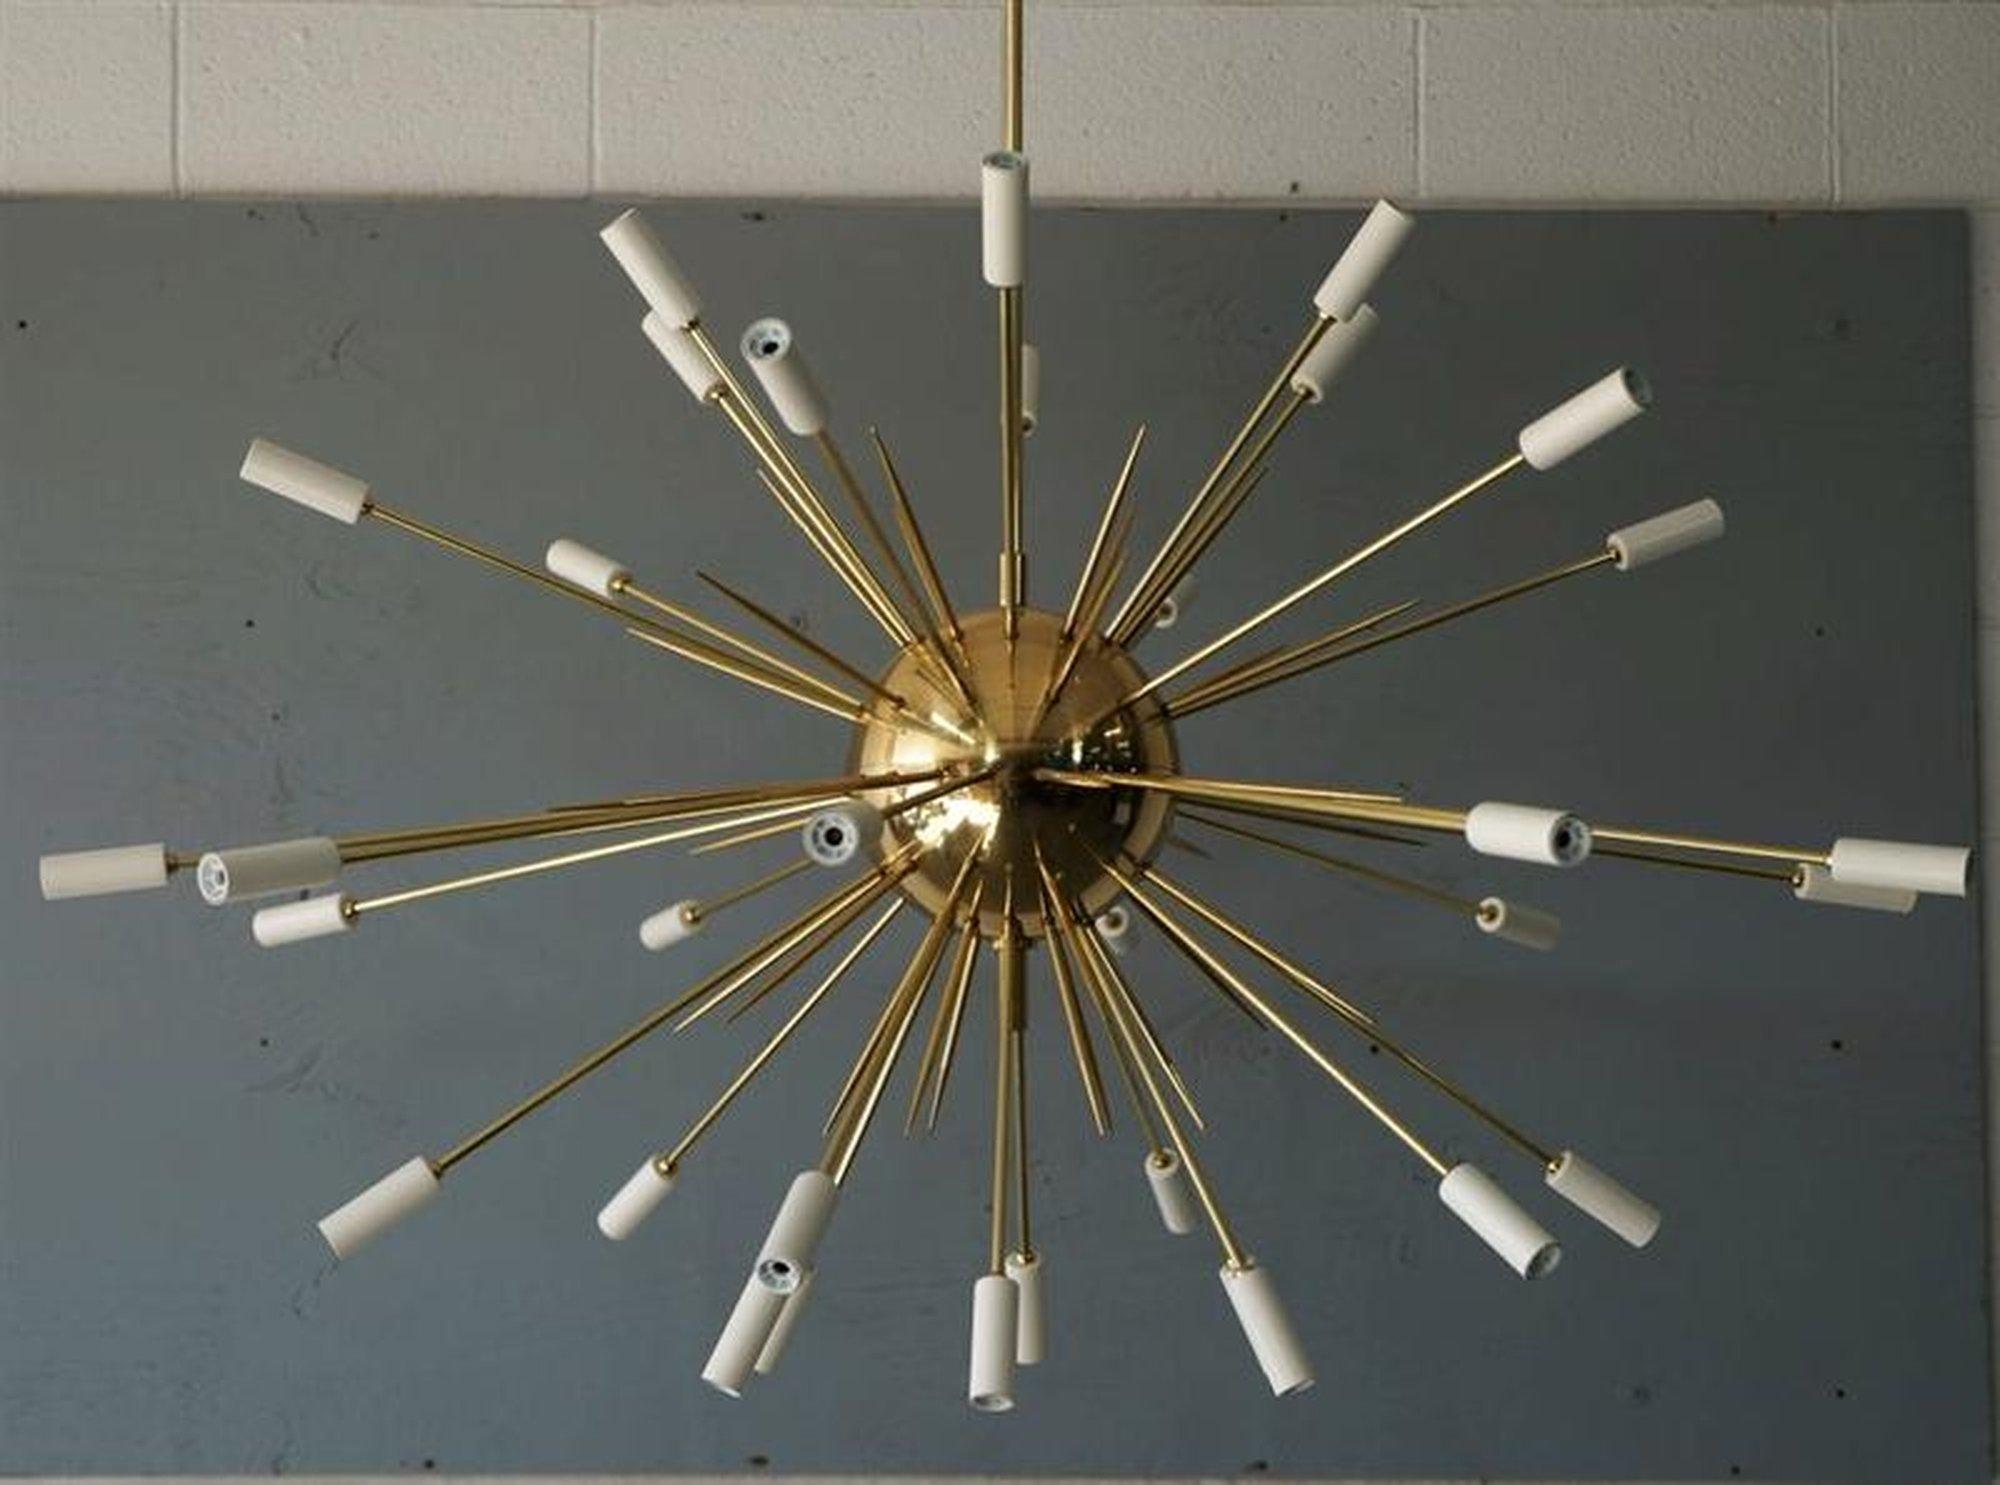 Large scale Italian light fixture reminiscent of an exploding star with white tips. Brass rods--both lit (34 candelabra bulbs) and speared--shoot out of a brass core. High-quality, hand made piece by Fedele Papagni Milano.
Wired for the US